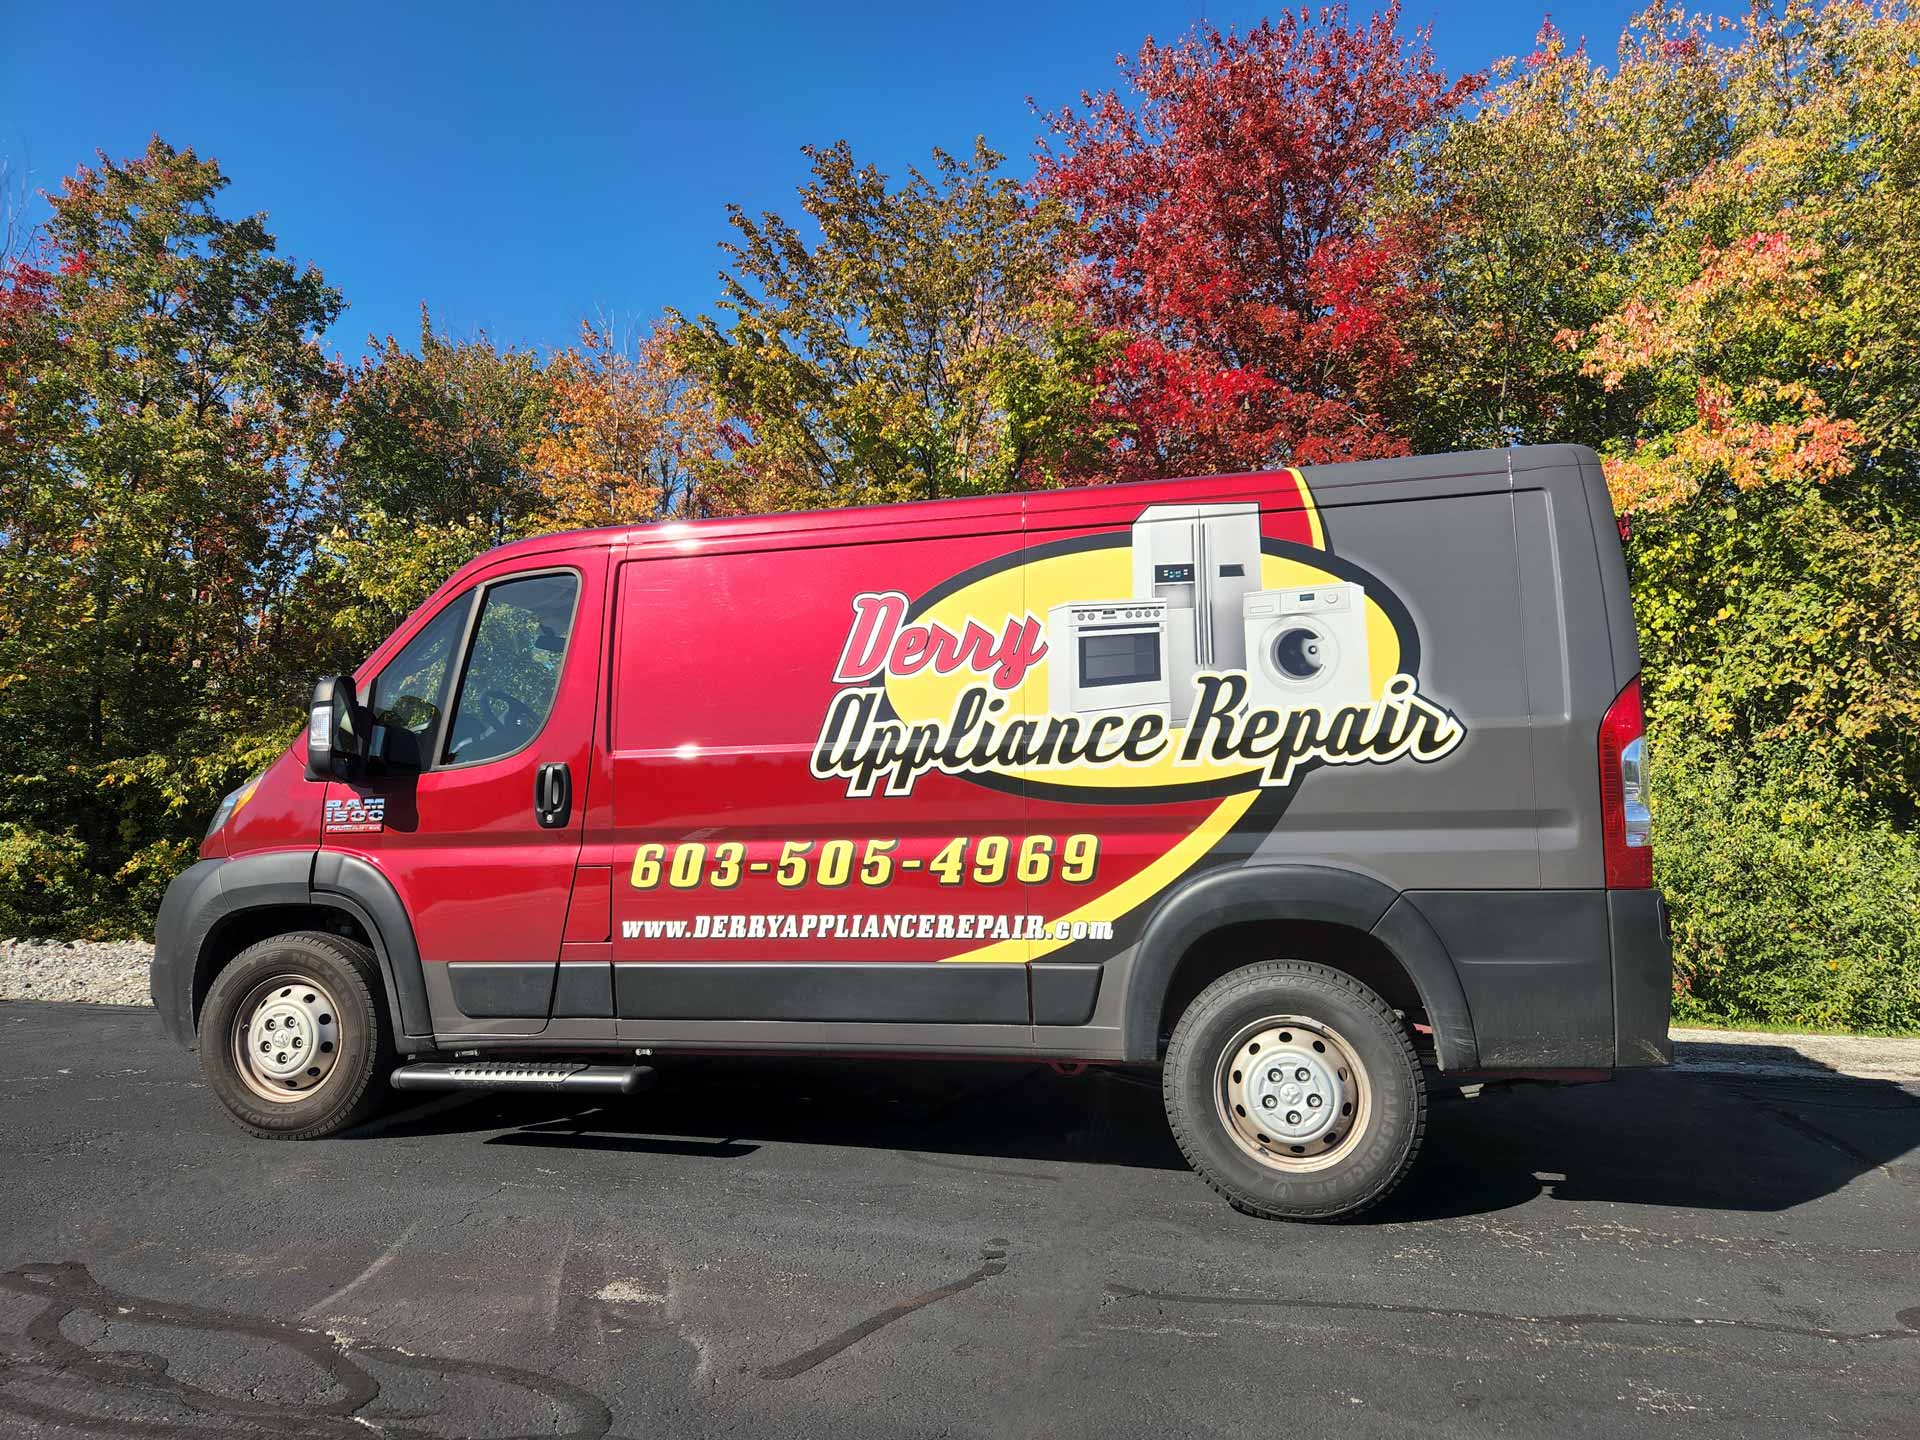 Photo of the Derry Appliance Repair van on a sunny fall day